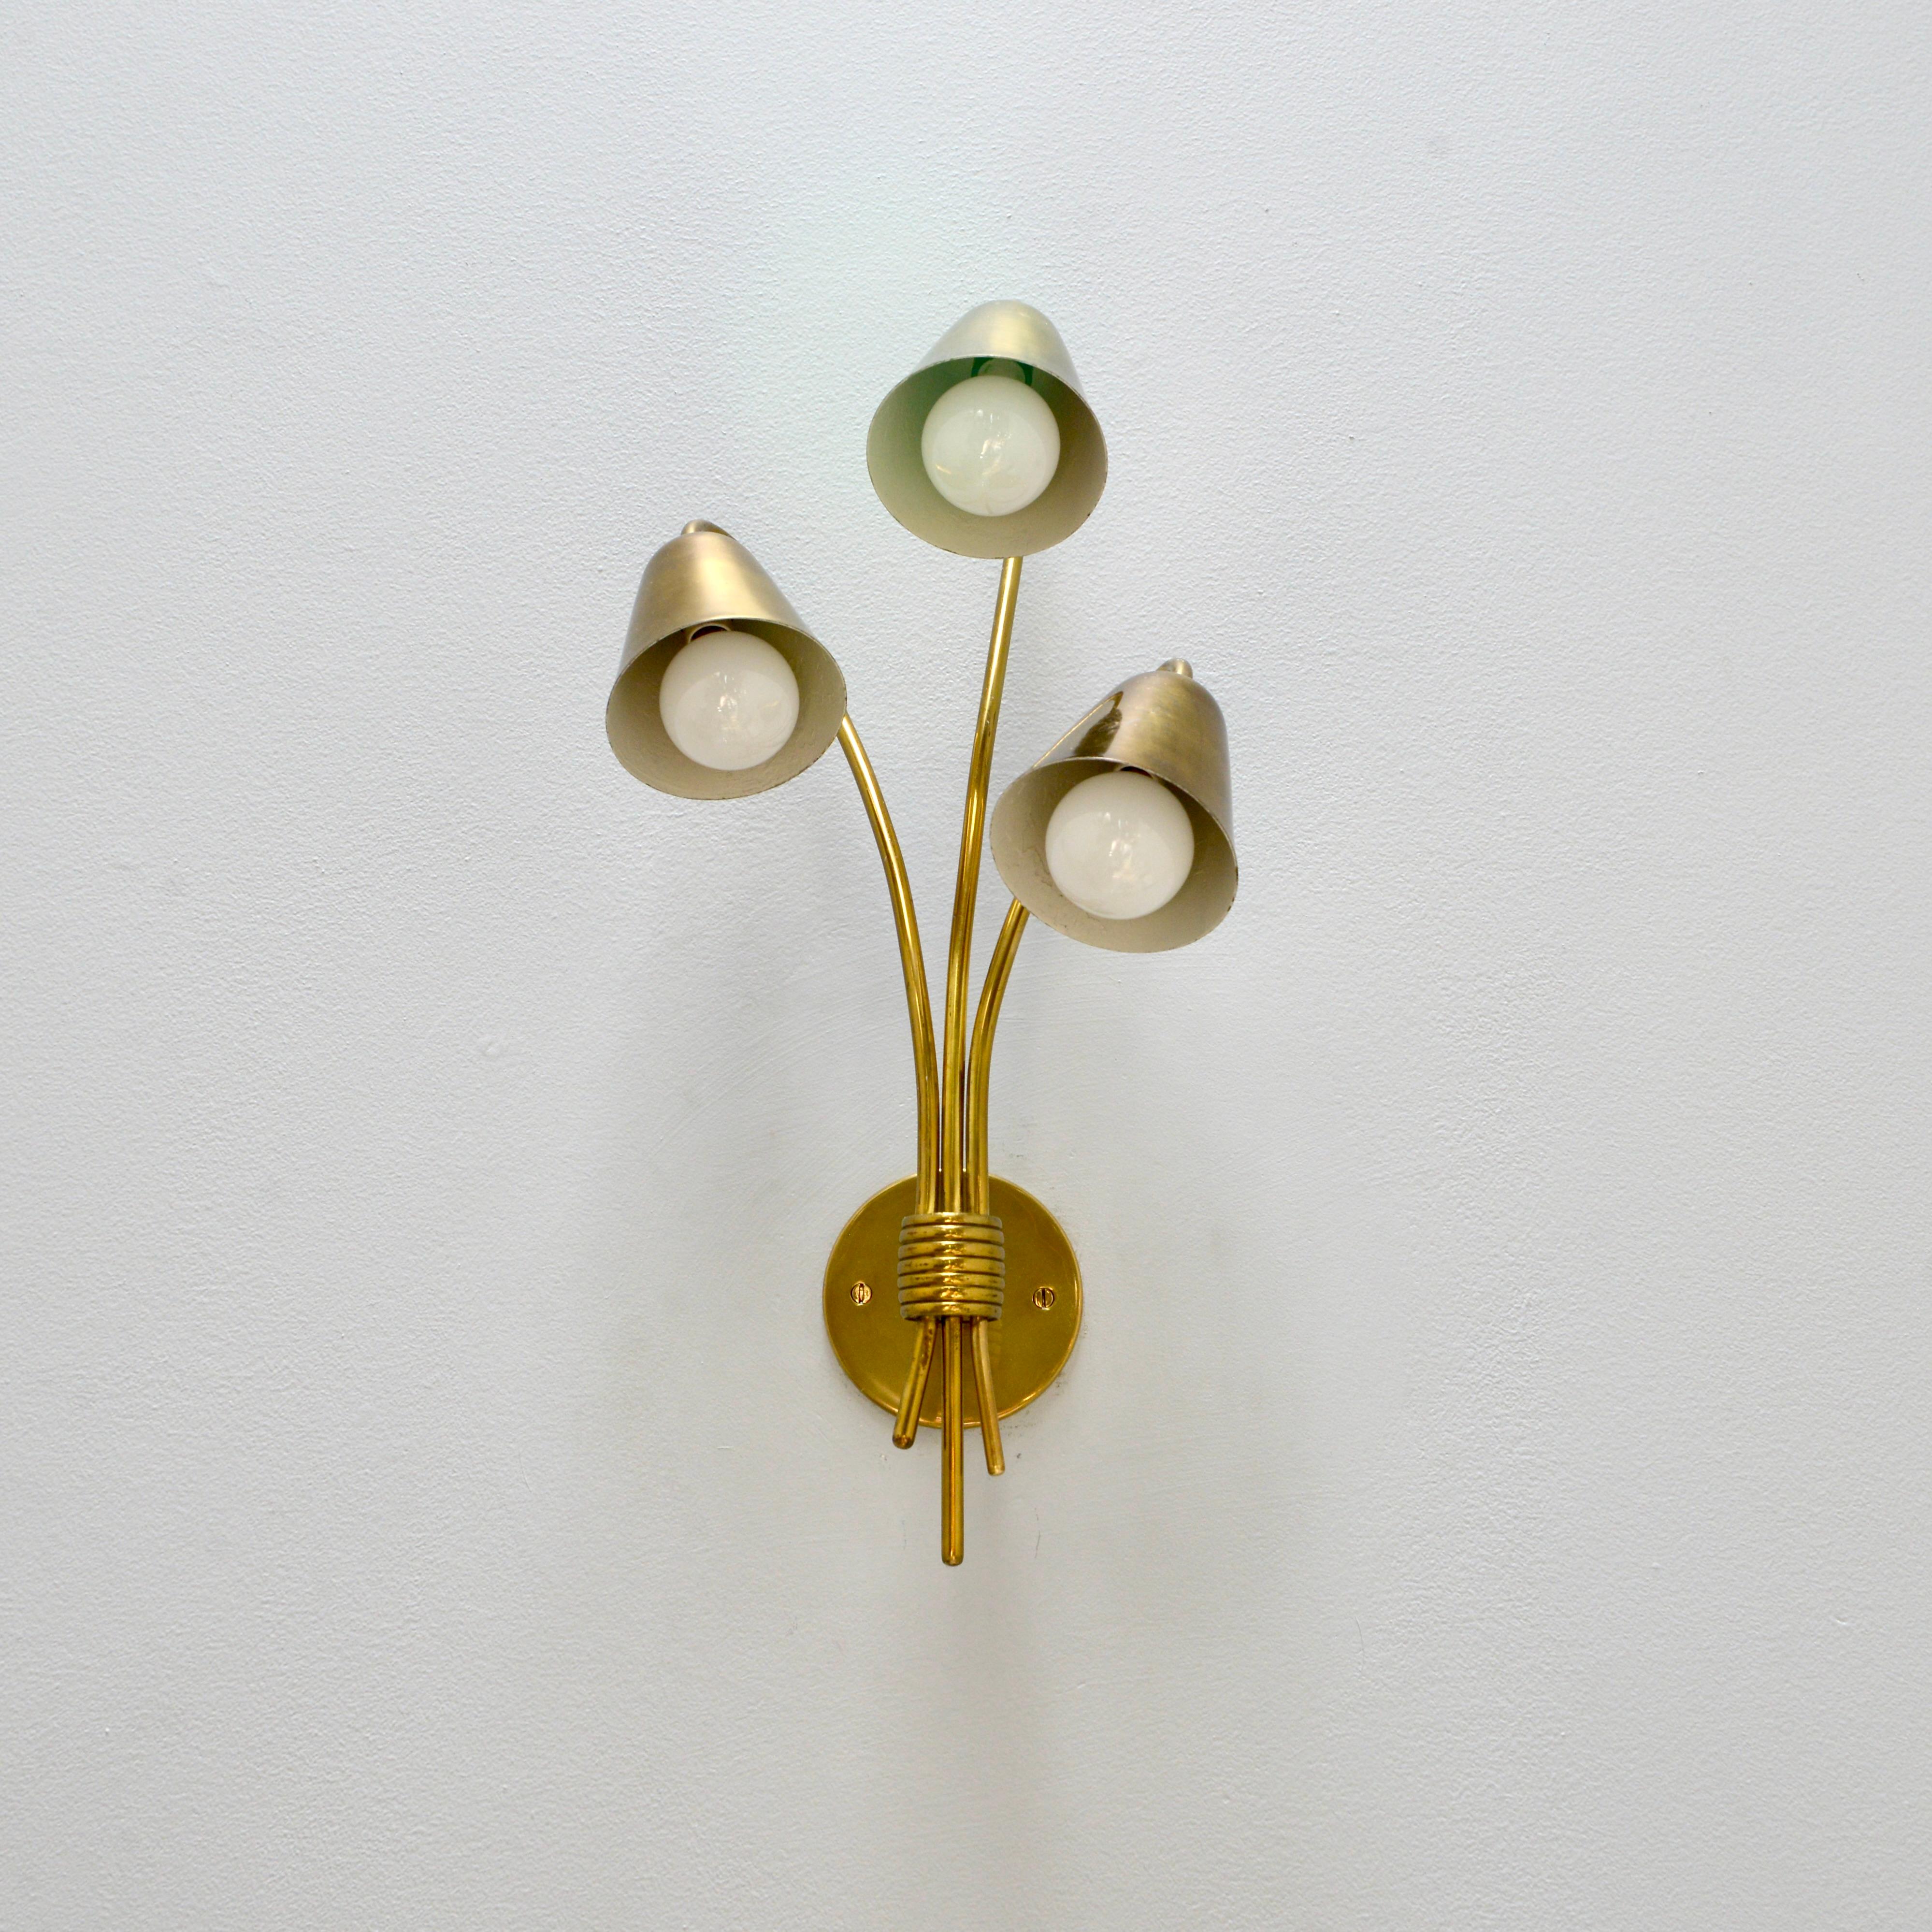 Wonderful single 1940s 3 arm botanical sconce. This sconce is all brass in its original finish. Partially restored with 1 E26 medium based socket for use in the USA. It can also be wired for use anywhere in the world. Lightbulb included with order.